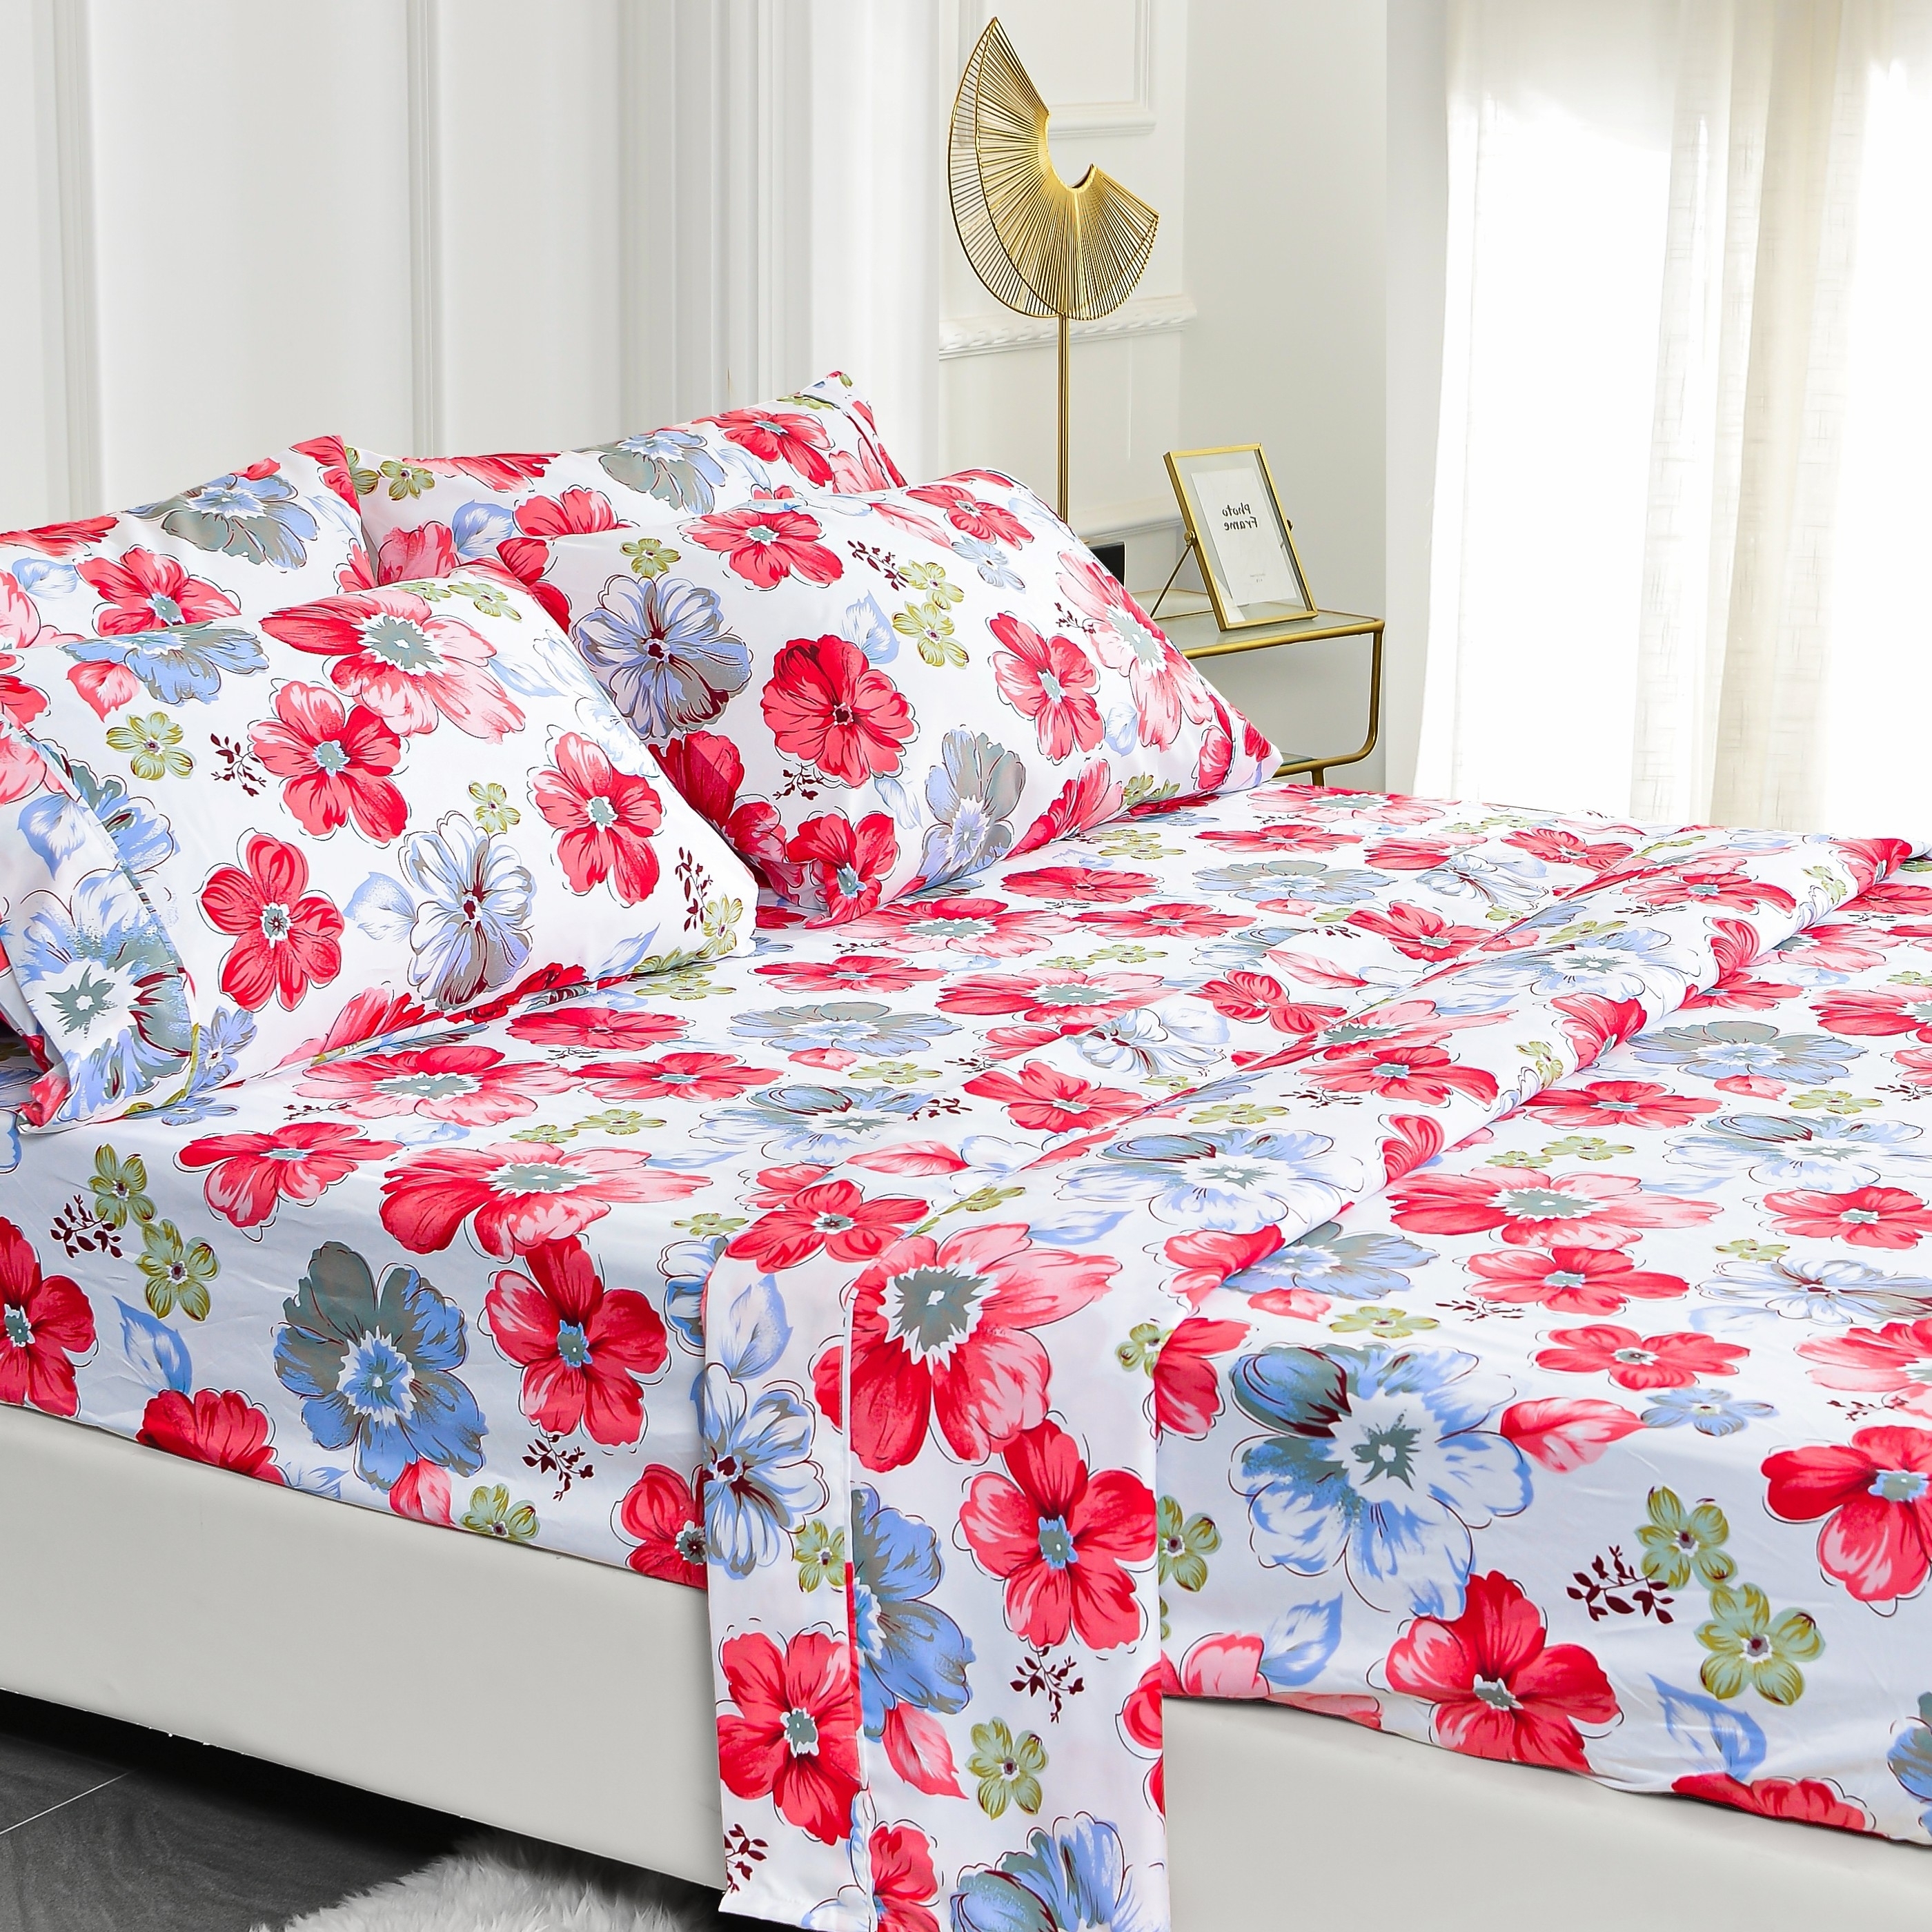 American Home Collection Ultra Soft 4-6 Piece Red Floral Printed Bed Sheet Set - Full